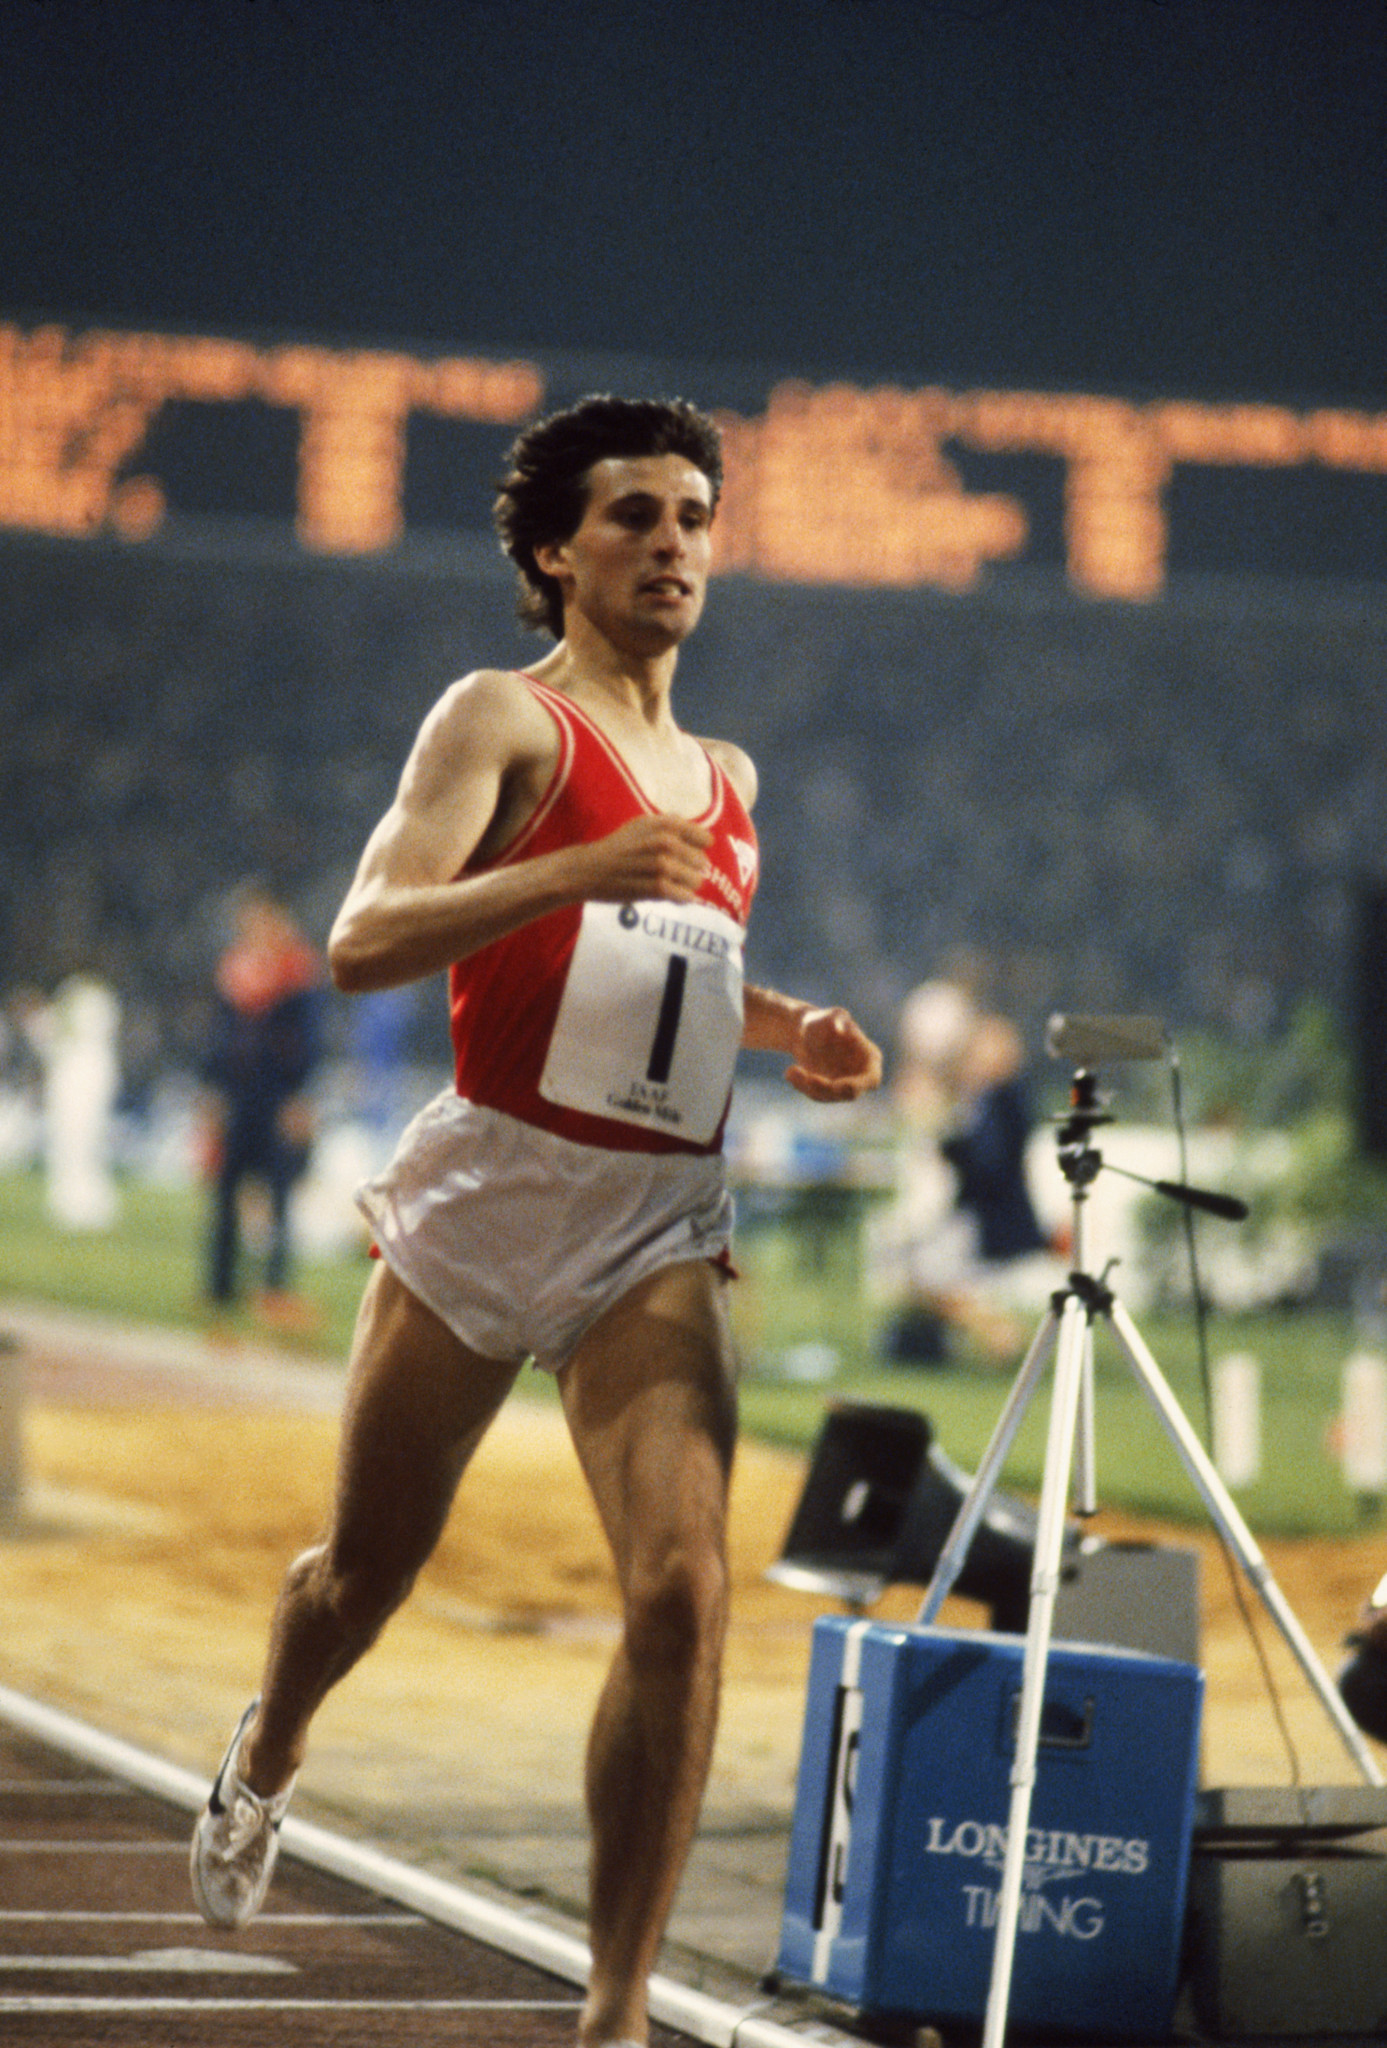 World Athletics President Sebastian Coe set a world record for the mile three times during his outstanding career ©Getty Images